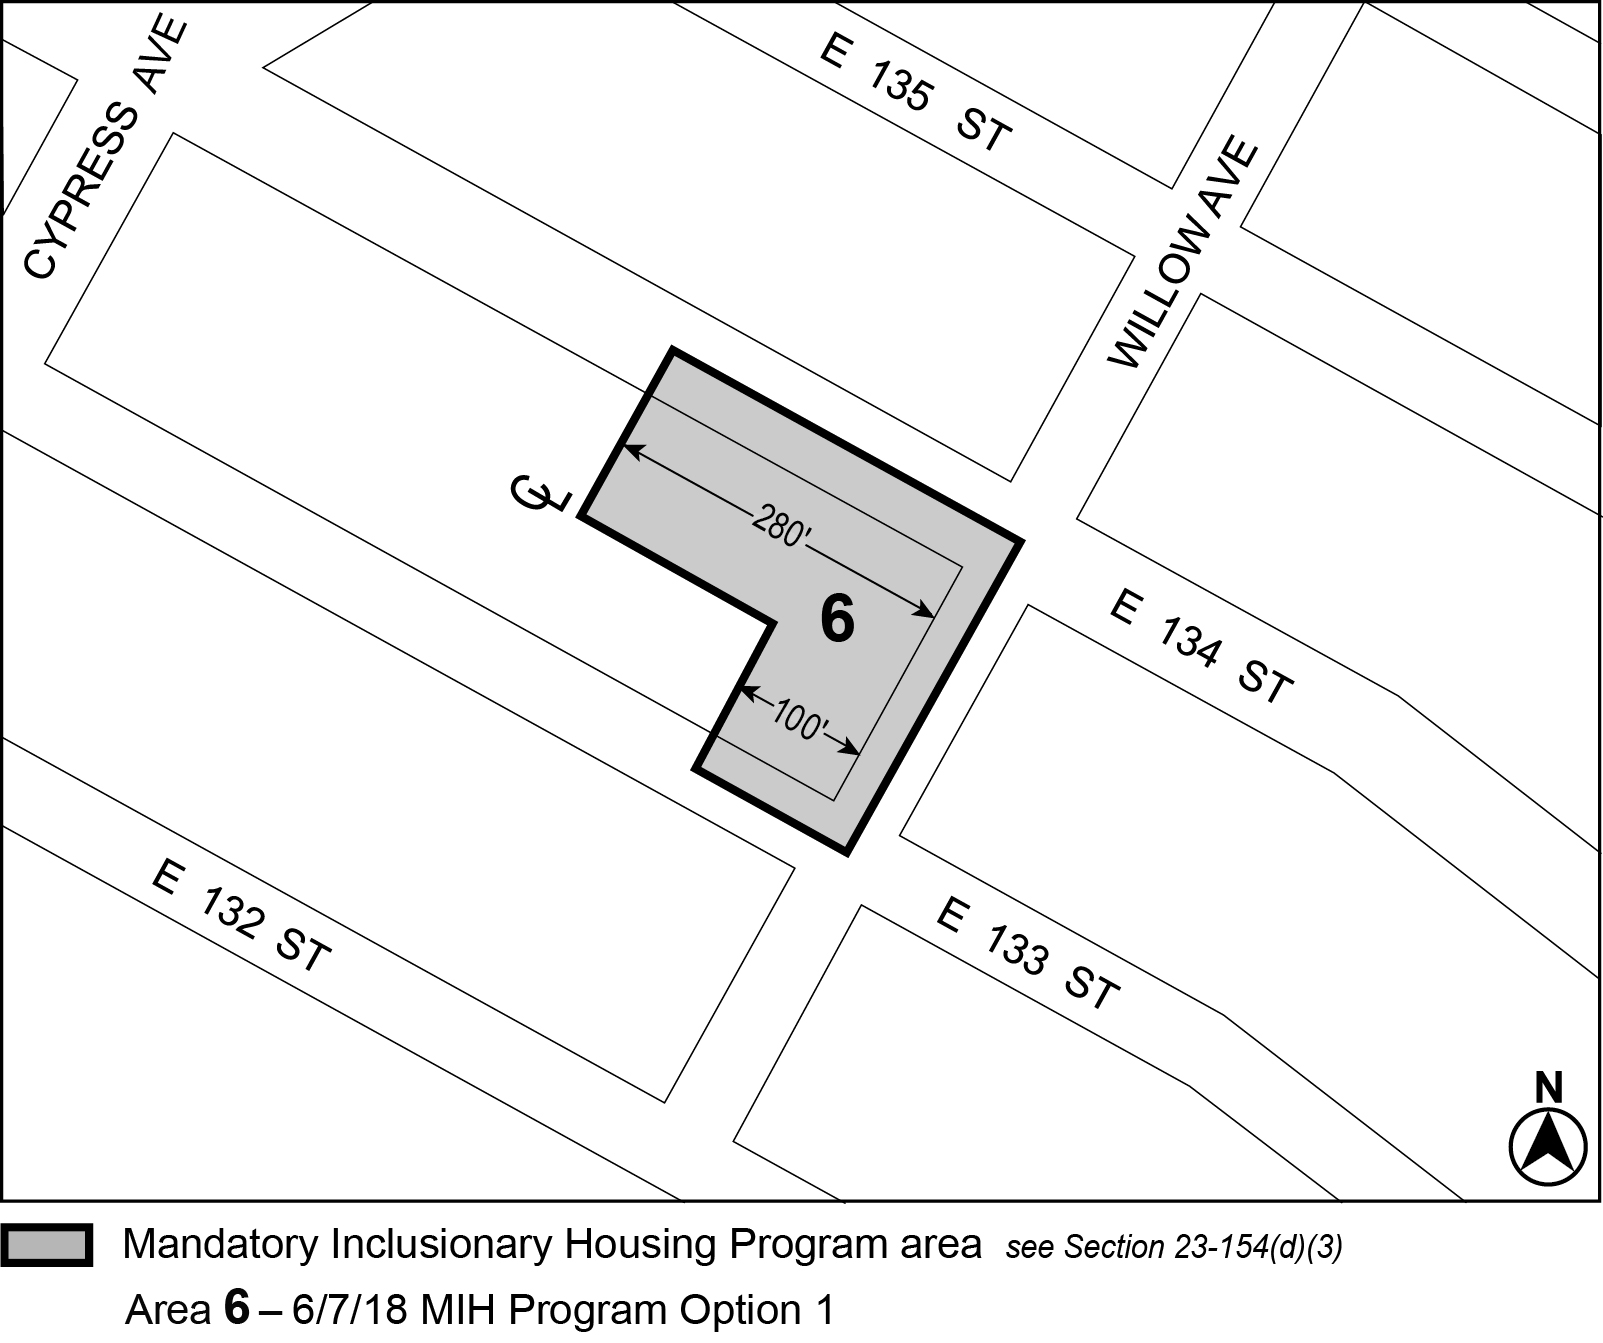 APPENDIX F, Bronx CD 1, Map 5, Area 6 (Option 1) per willow Ave rezoning (N 180089 ZRX) adopted 7 June, 2018